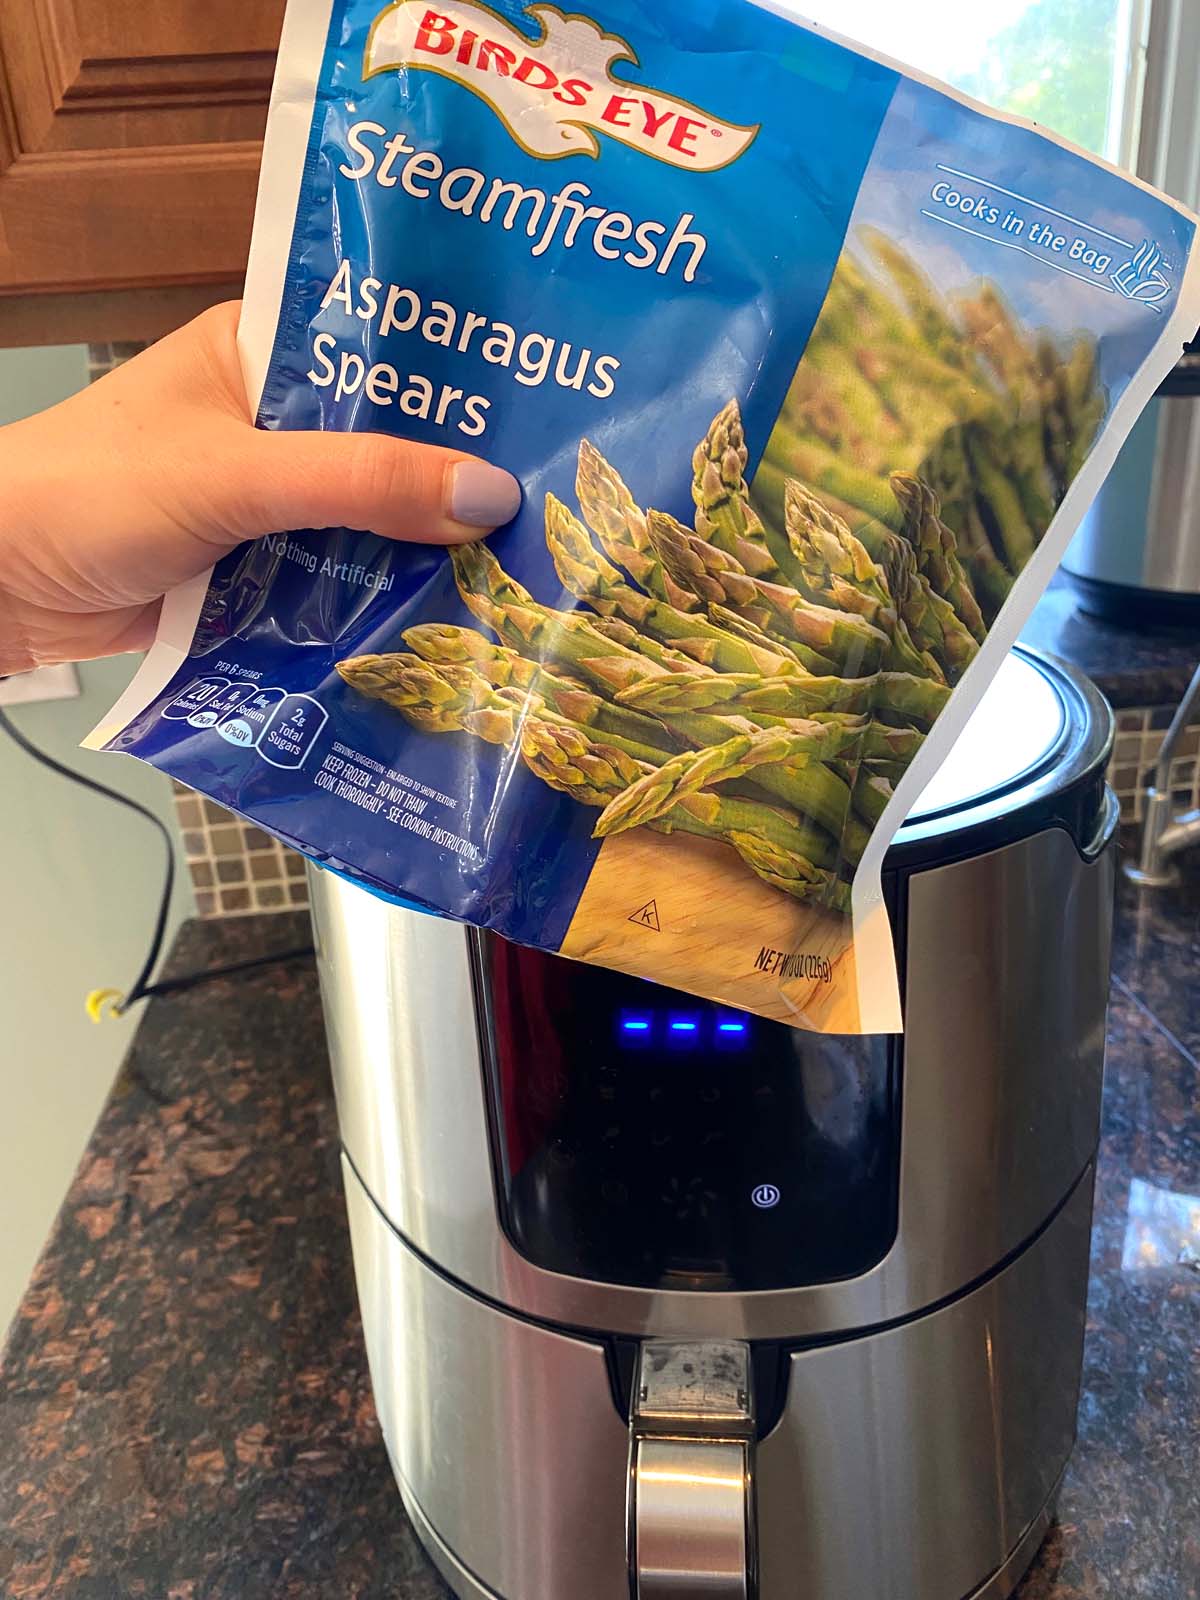 A bag of frozen asparagus in front of an air fryer.